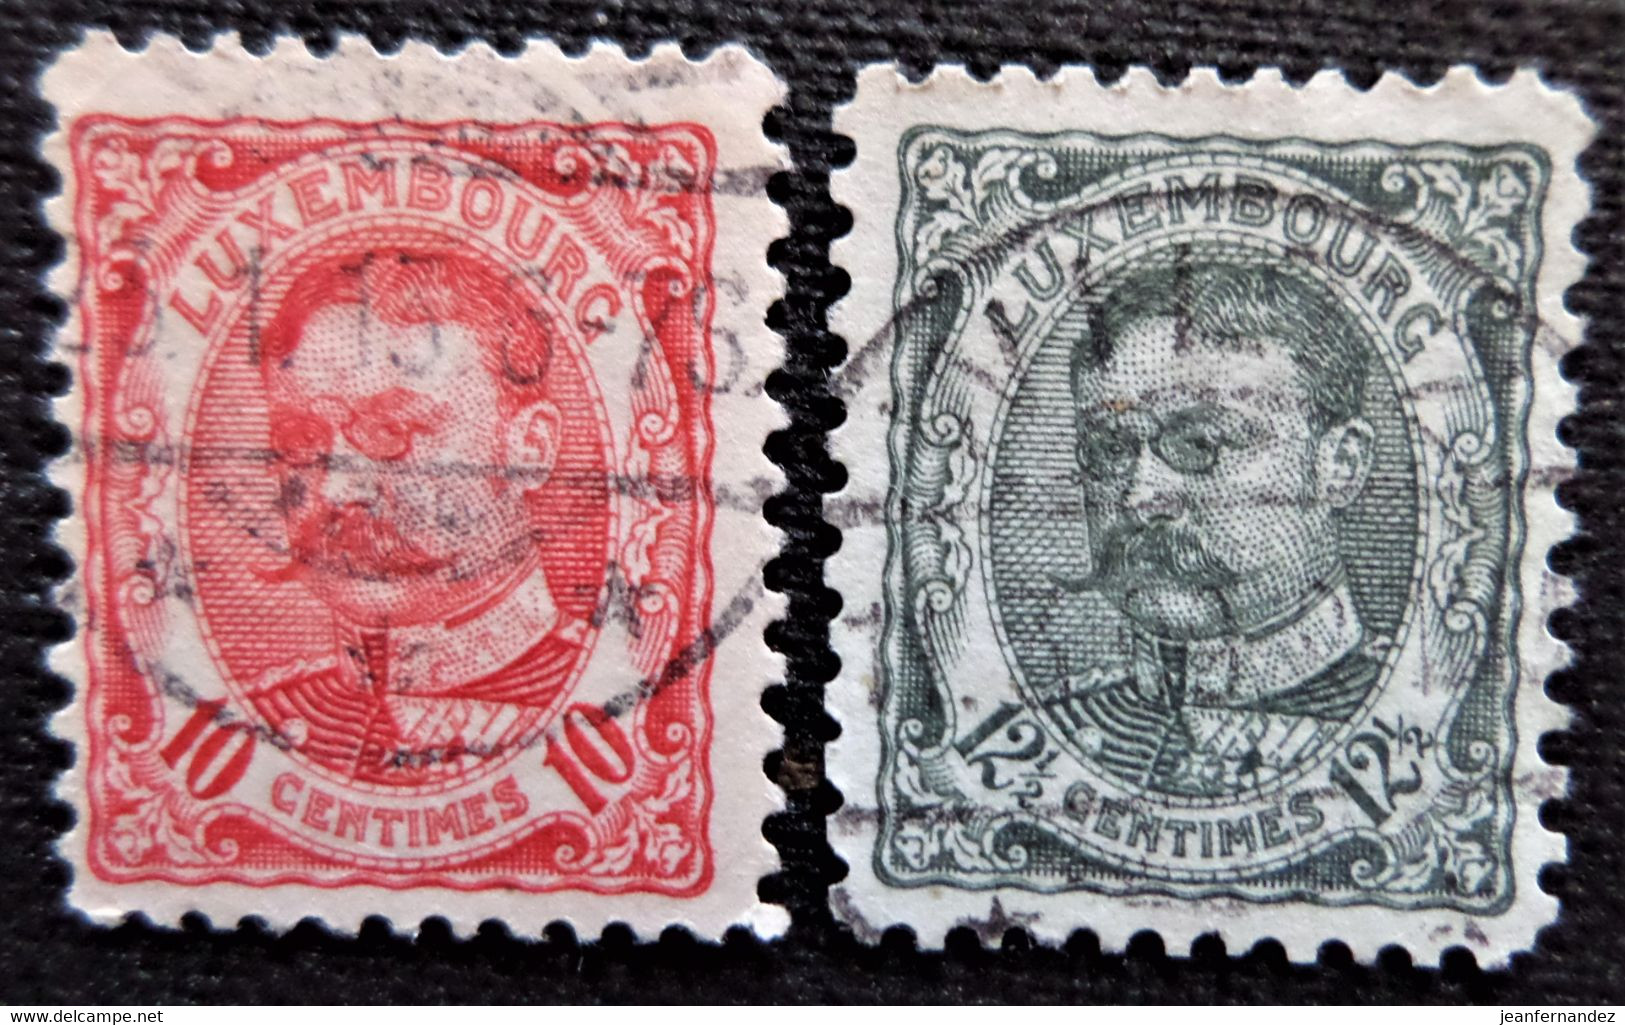 Timbres De Luxembourg Y&T N° 74 Et 75 - 1906 Guillaume IV